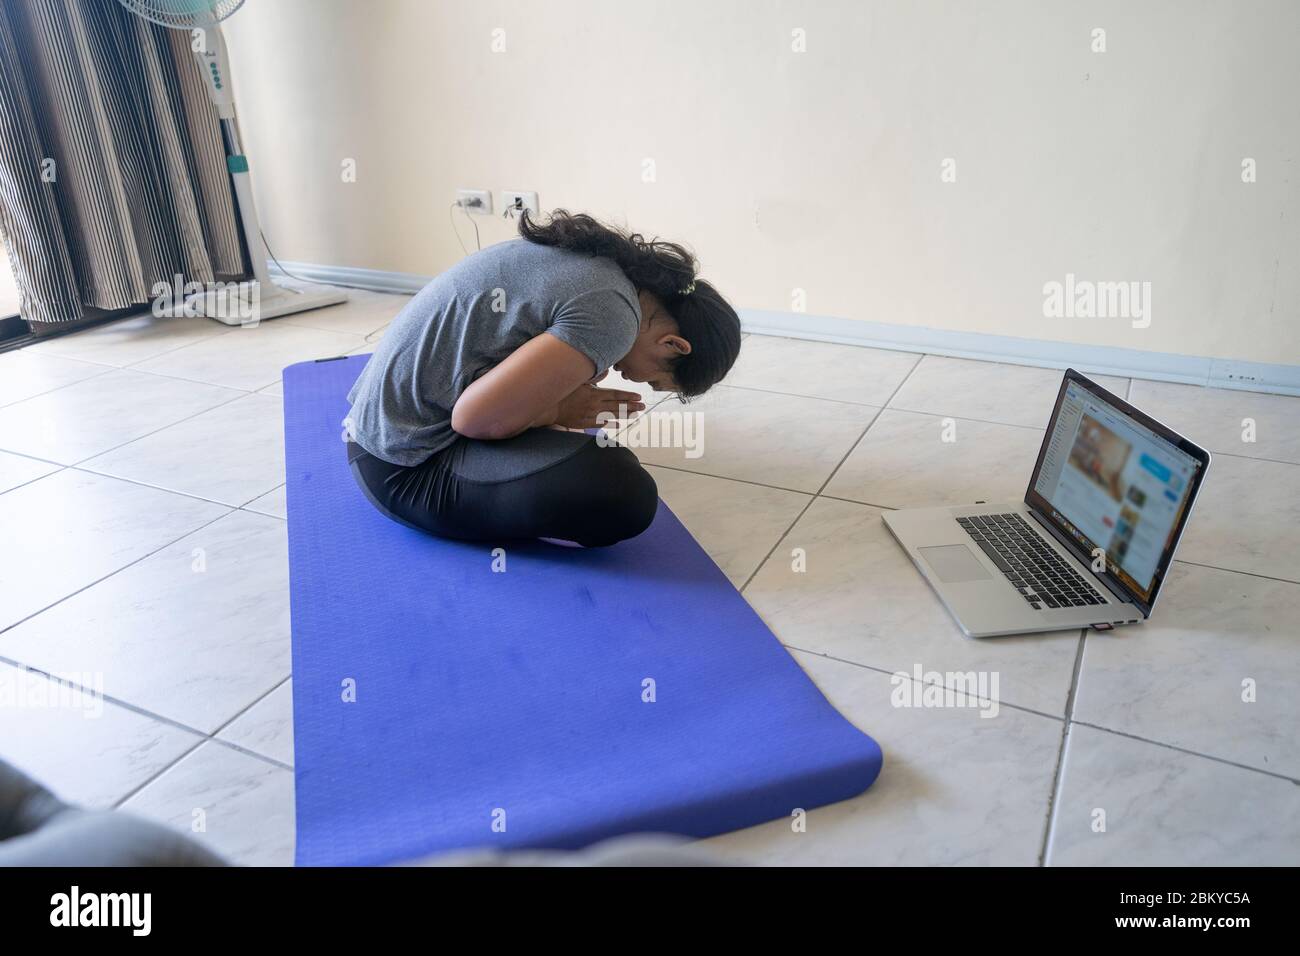 A woman undertaking an online physical fitness exercise lesson within an apartment during a lockdown period of the COVID-19 Pandemic 2020. Stock Photo